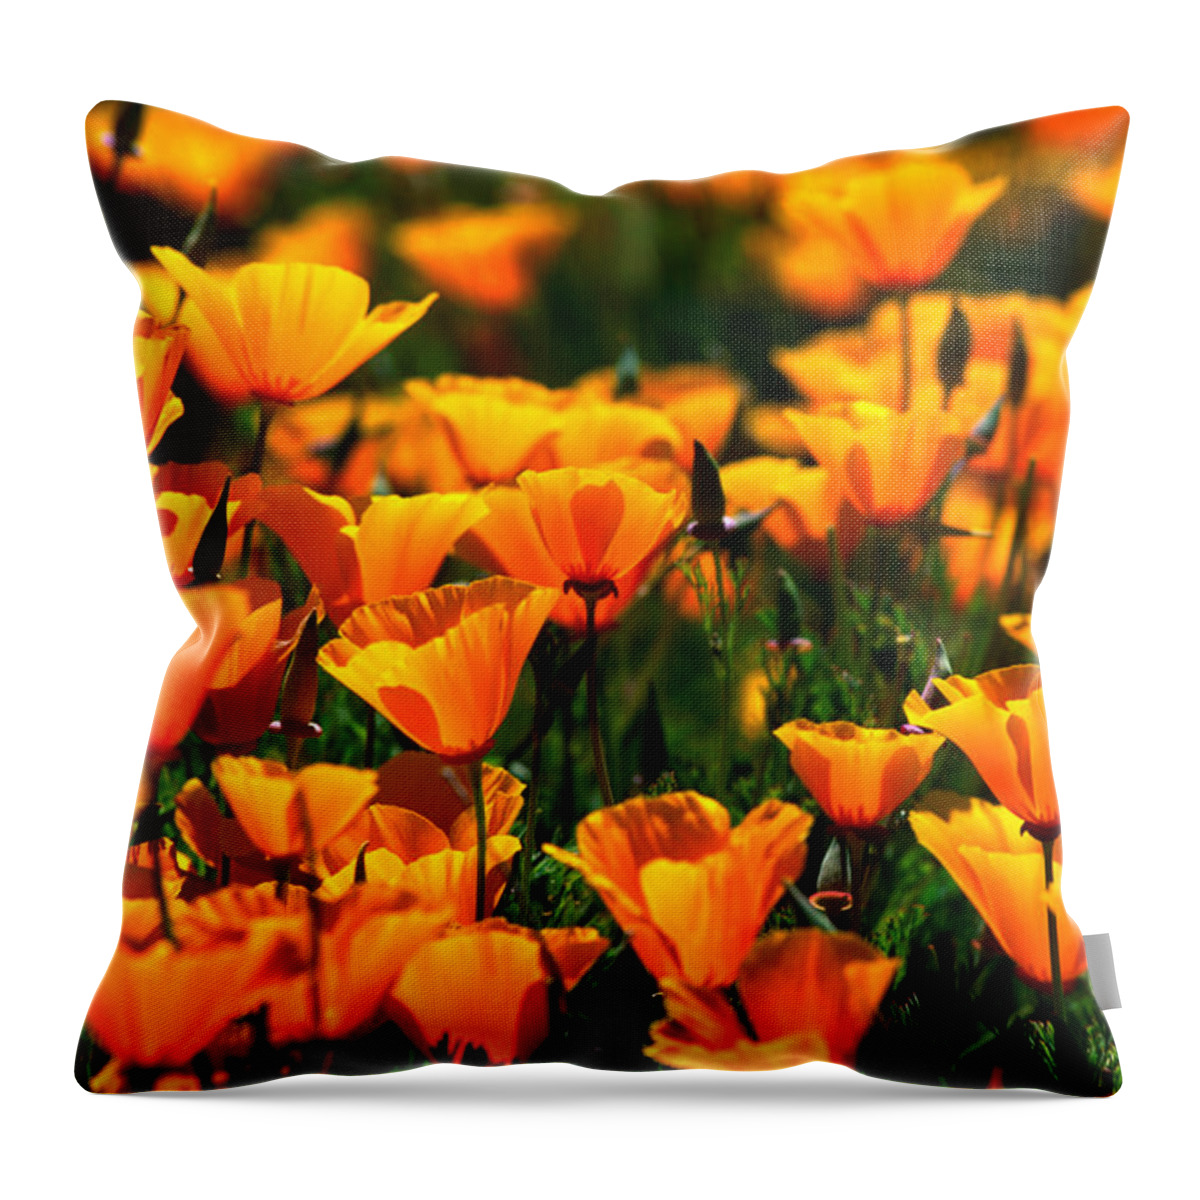 California Throw Pillow featuring the photograph Californian Poppies, United States Of by John Elk Iii